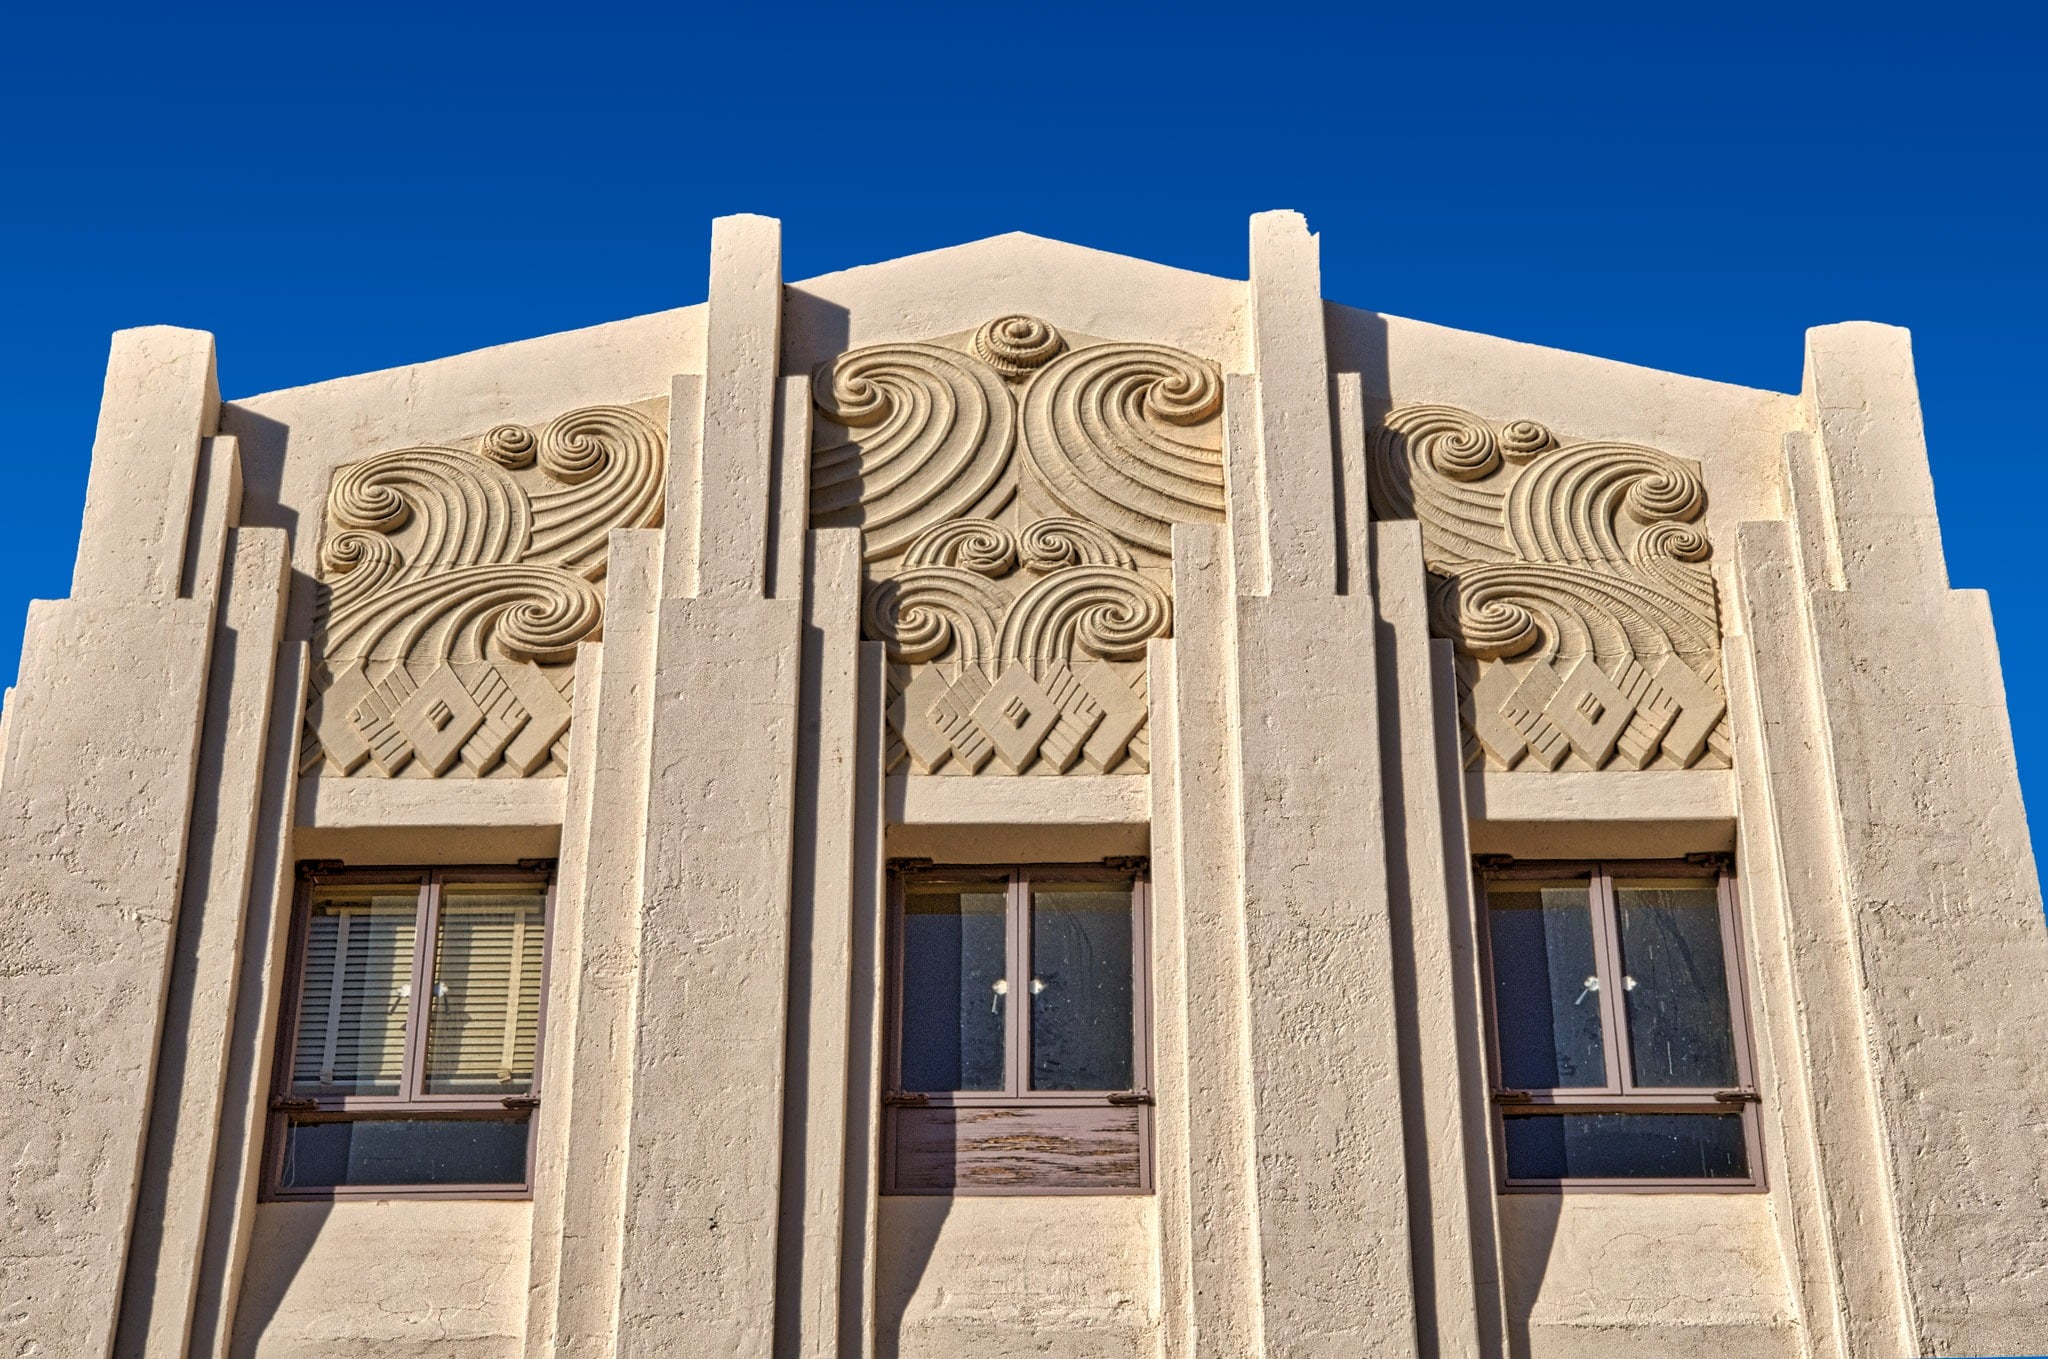 This is a close-up view of the front elevation parapet of the Cochise County Courthouse in Bisbee, Arizona. The embedded Art Deco decorations look to be carved blocks fitted into the building. They may, however, be cast concrete blocks rather than carved stone.